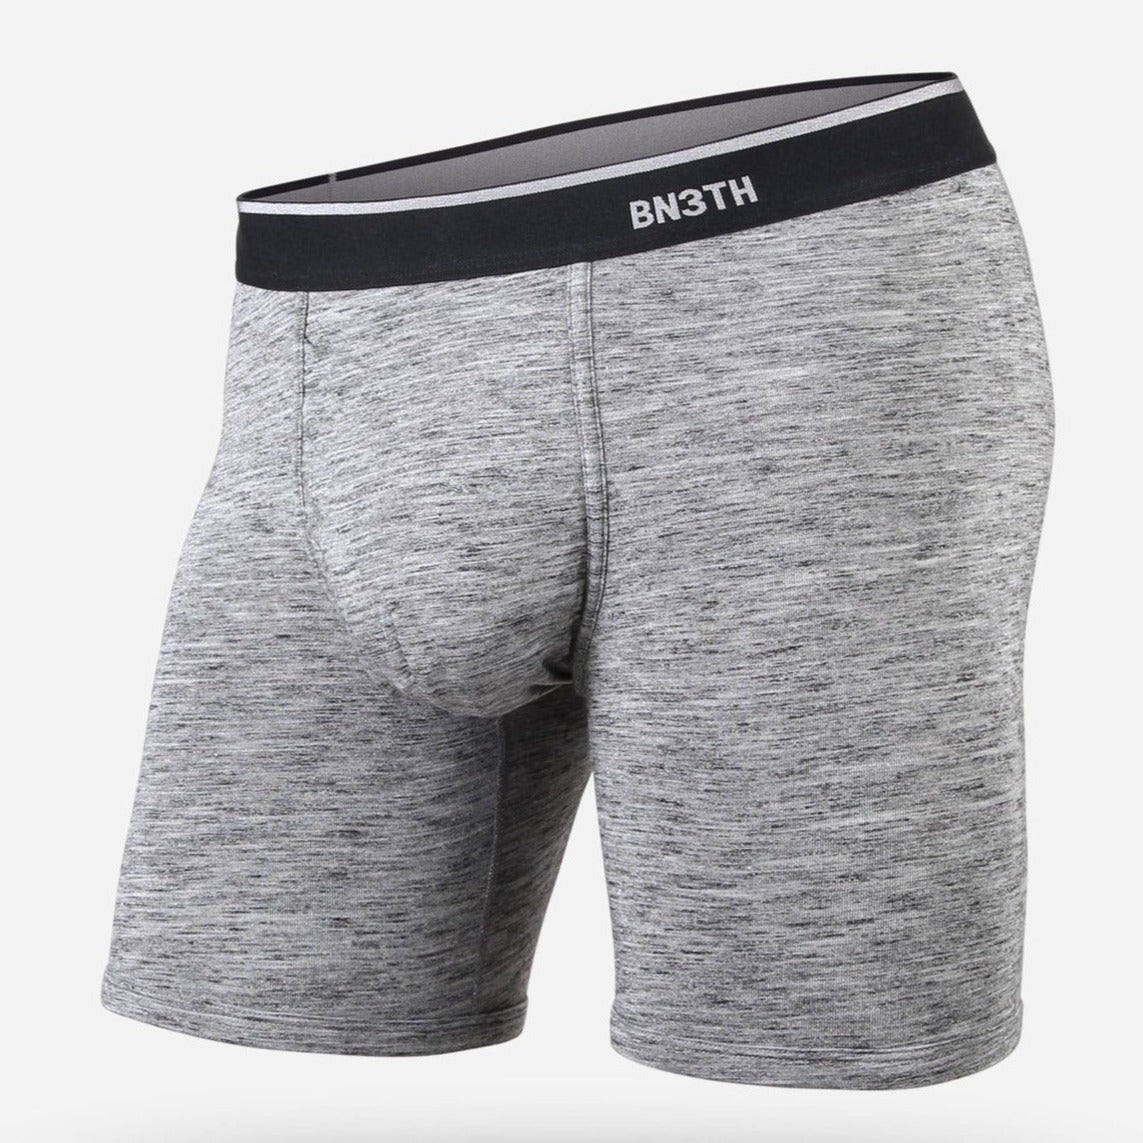 BN3TH - CLASSIC BOXER BRIEF SOLID IN CHARCOAL HEATHER - the Urban Shoe Myth